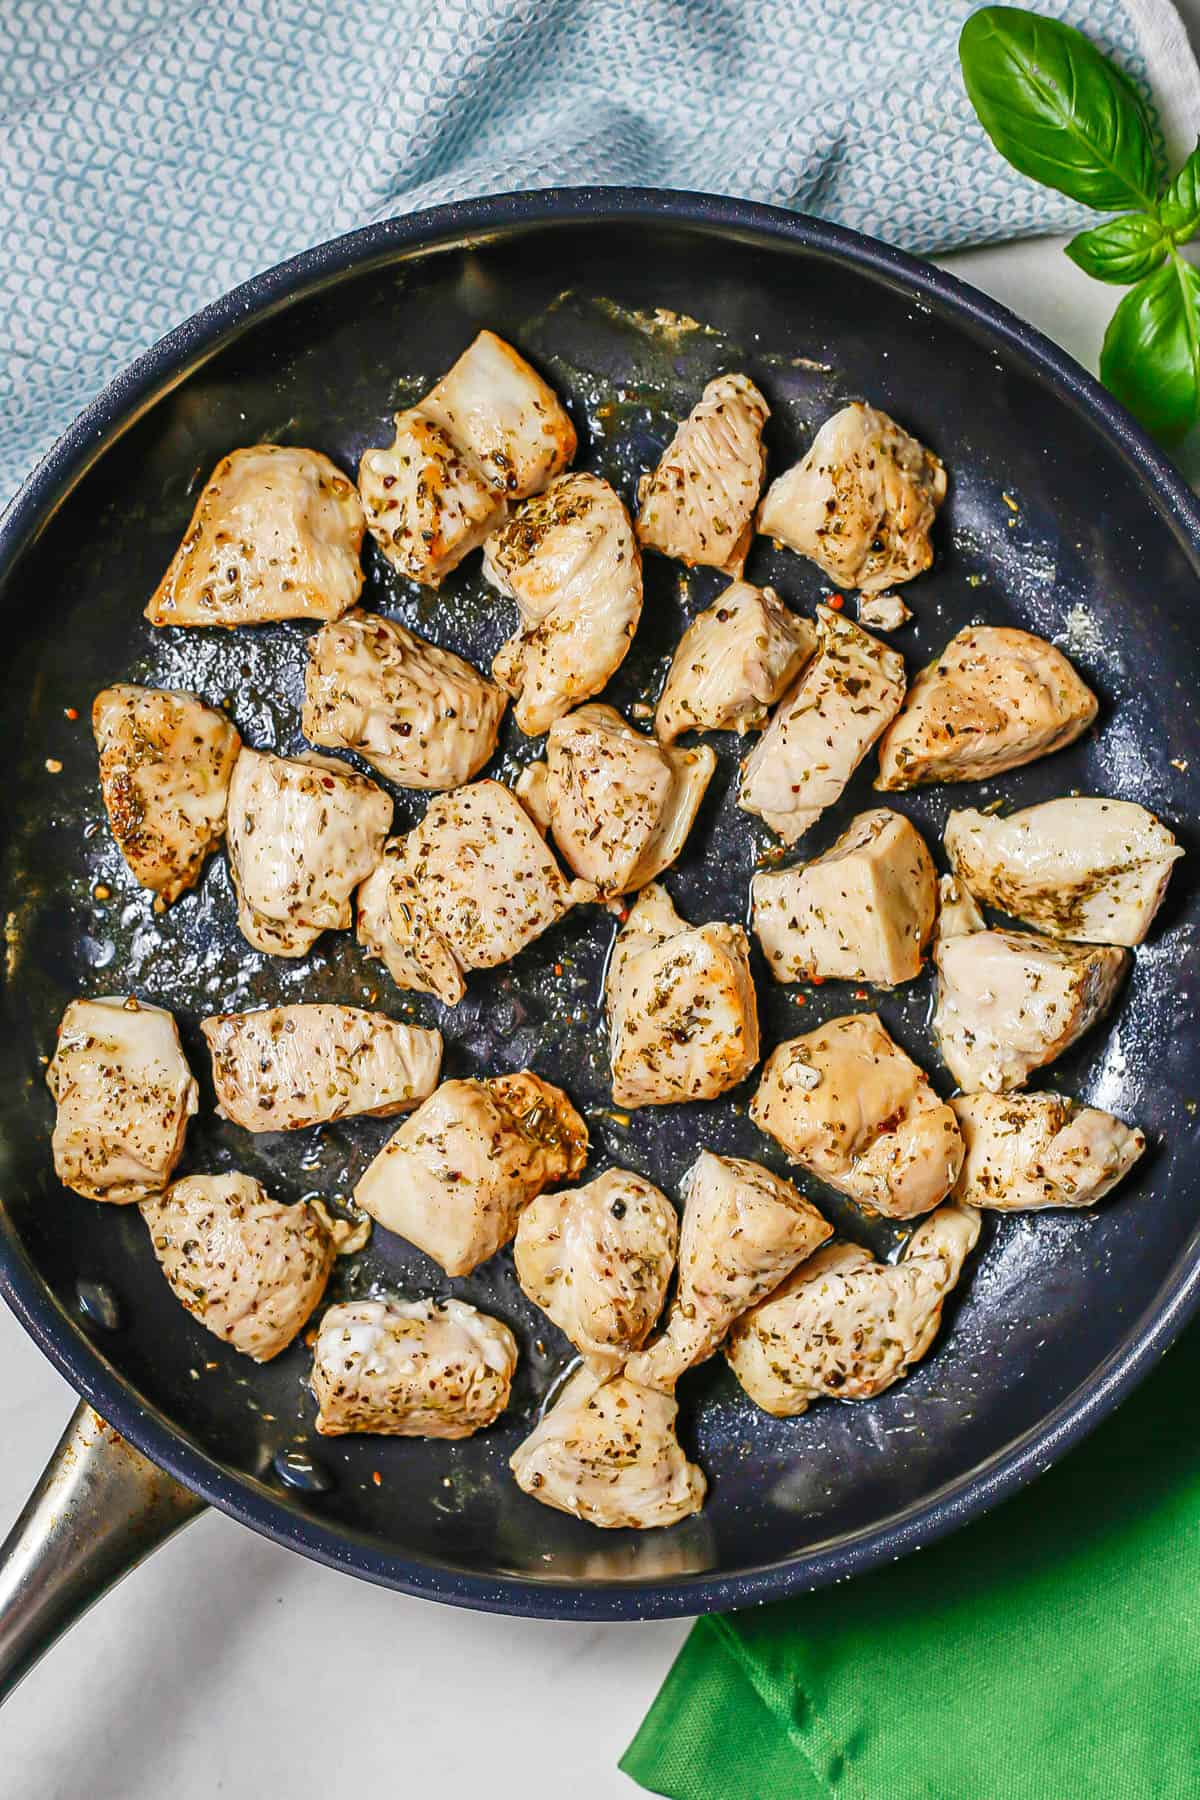 Seared cubed chicken in a skillet.